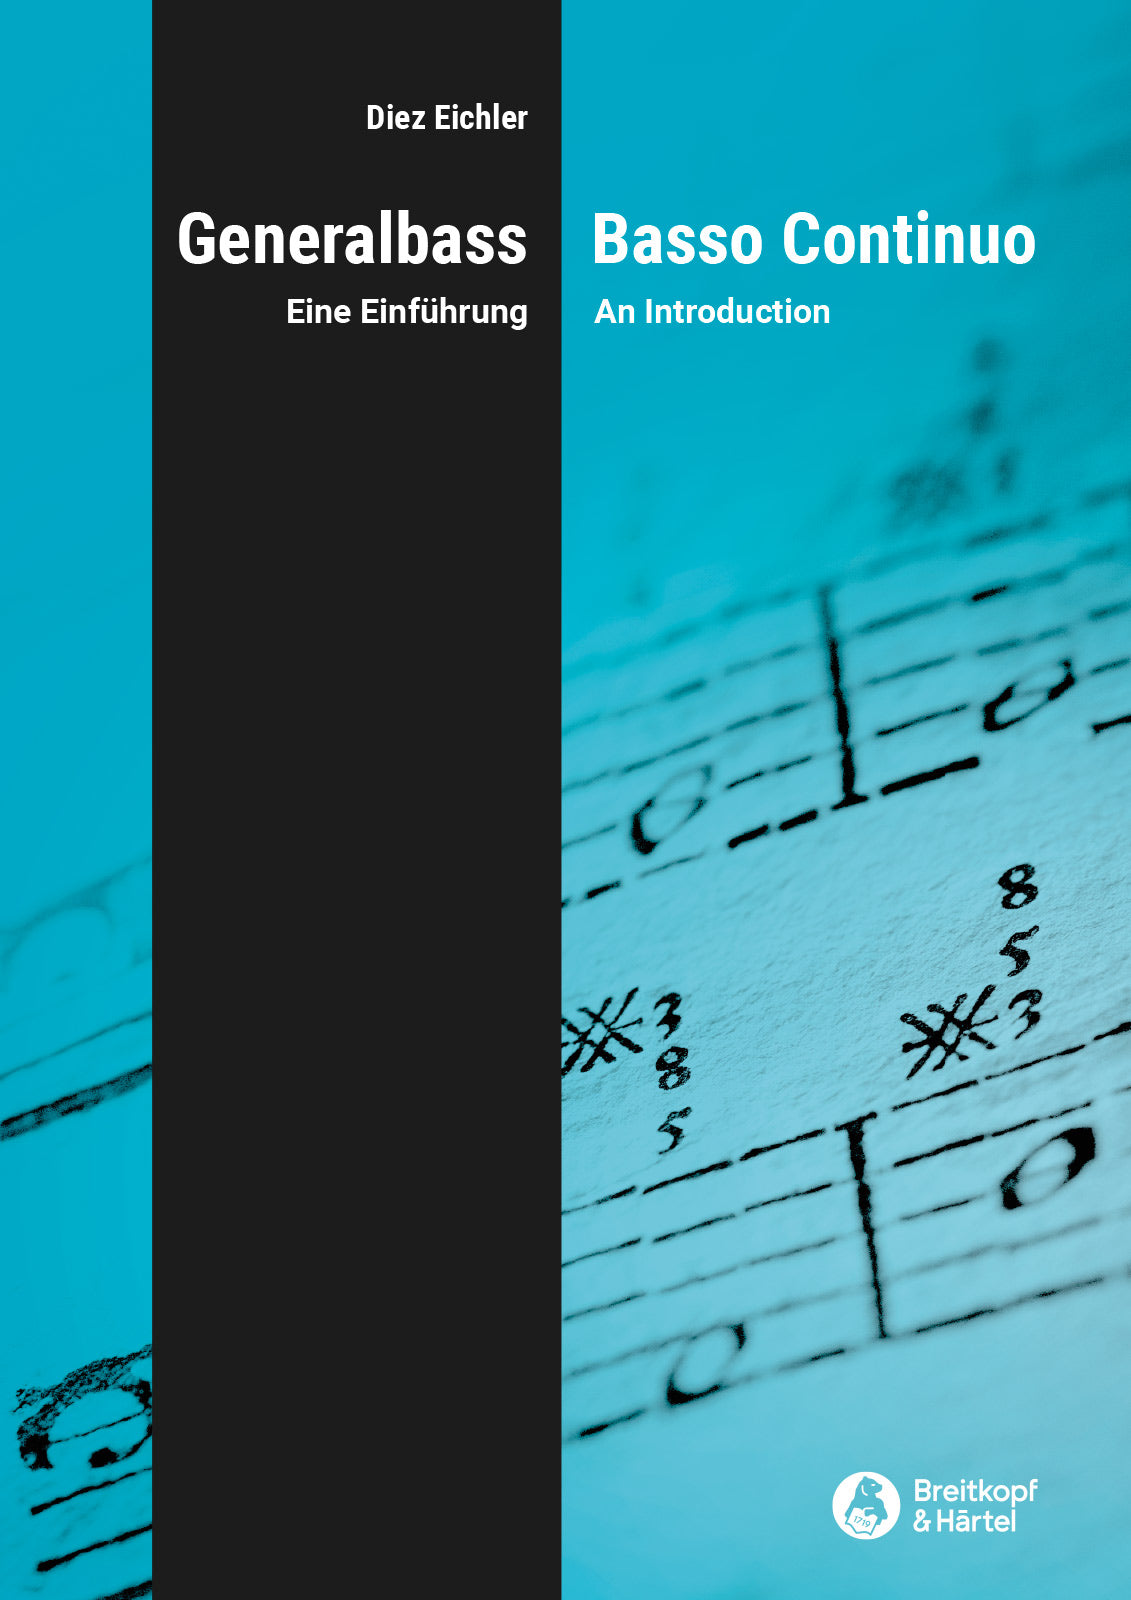 Basso continuo: An Introduction